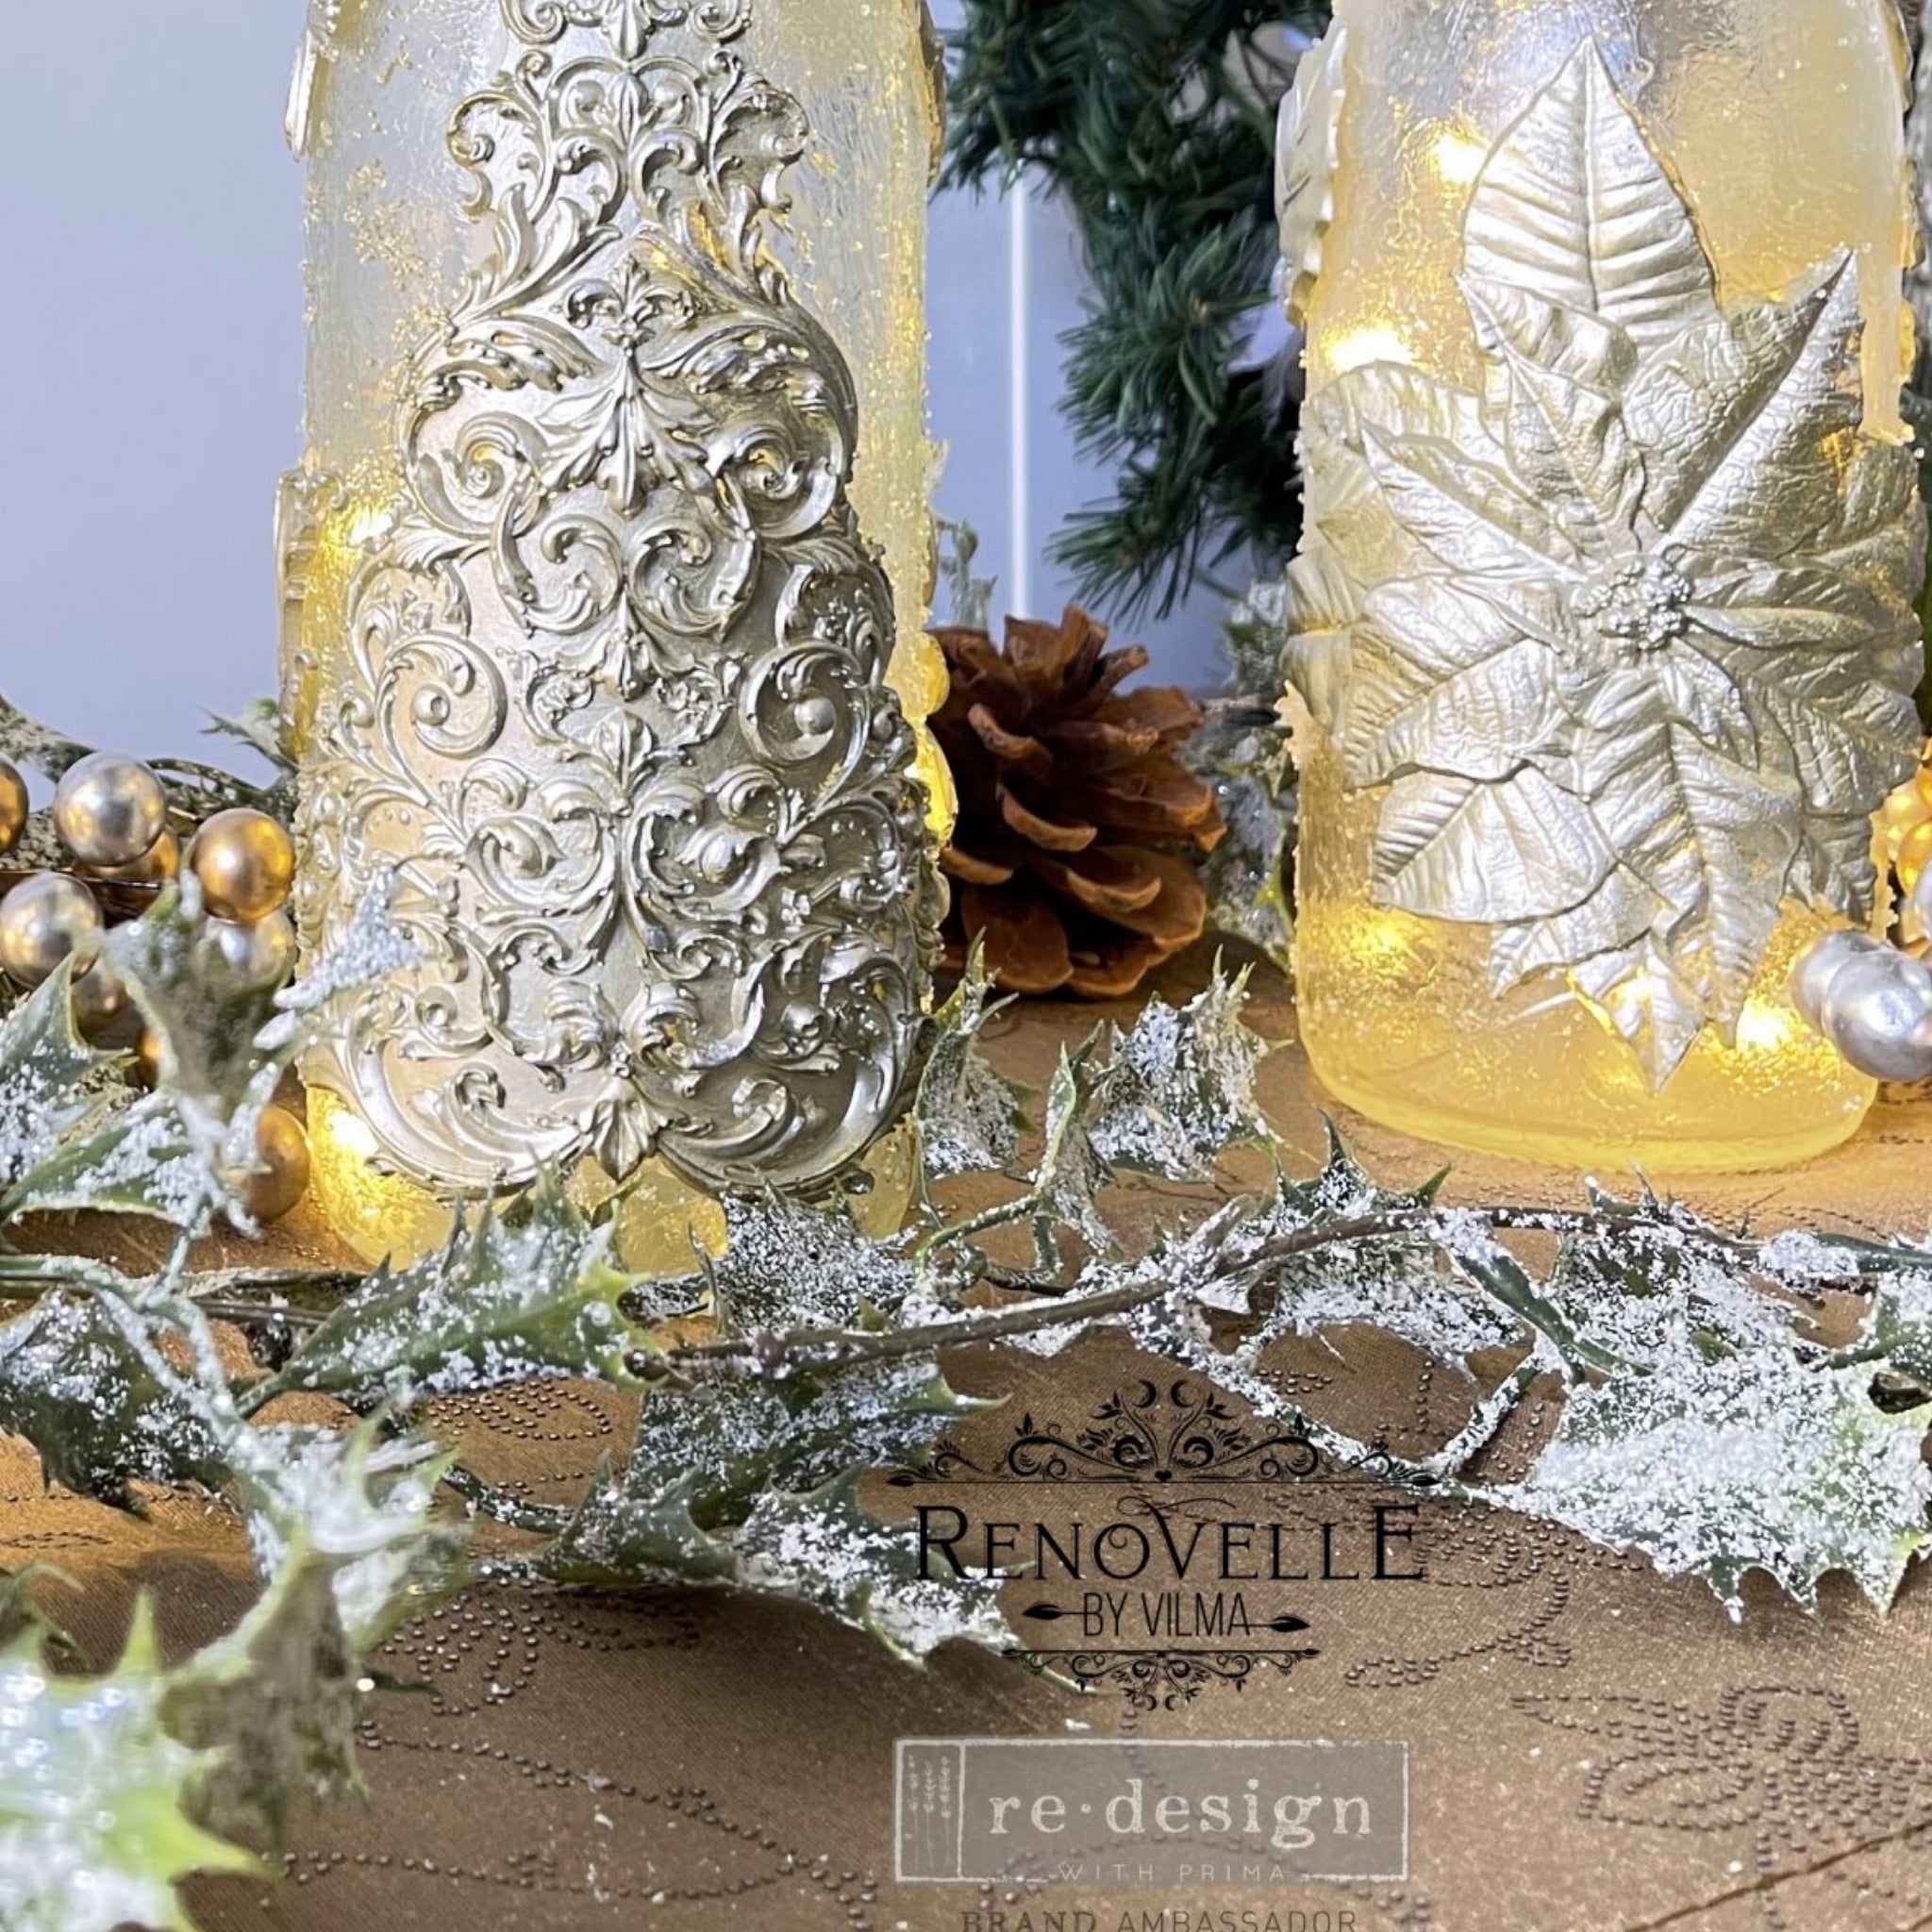 Two glass bottles refurbished by Renovelle by Vilma. One bottle features ReDesign with Prima's Perfect Poinsettia silicone mould casting in silver on it.